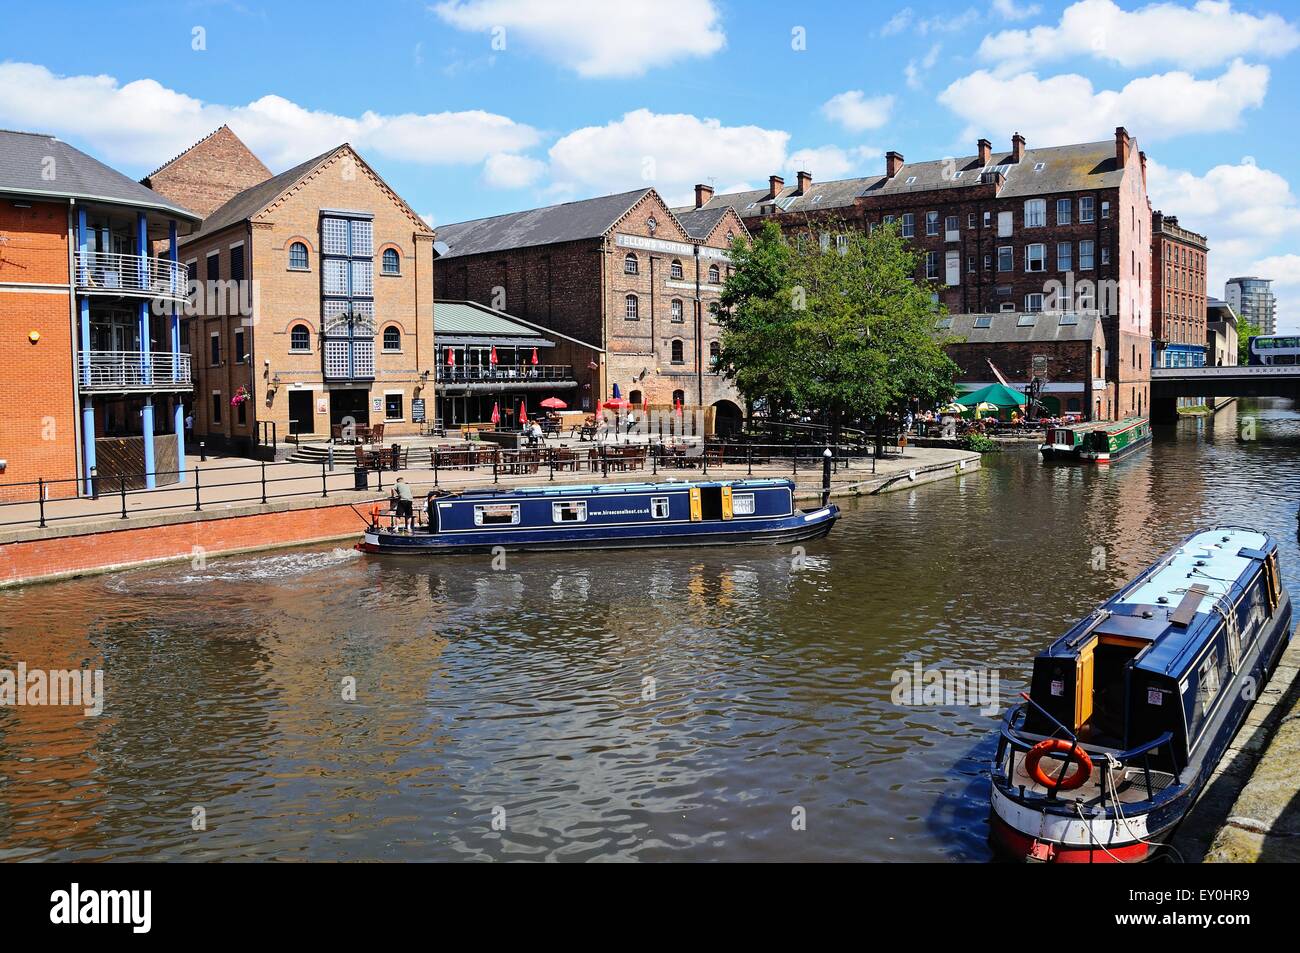 Narrowboats travelling along the Nottingham and Beeston Canal with buildings along the city wharf, Nottingham, England, UK. Stock Photo